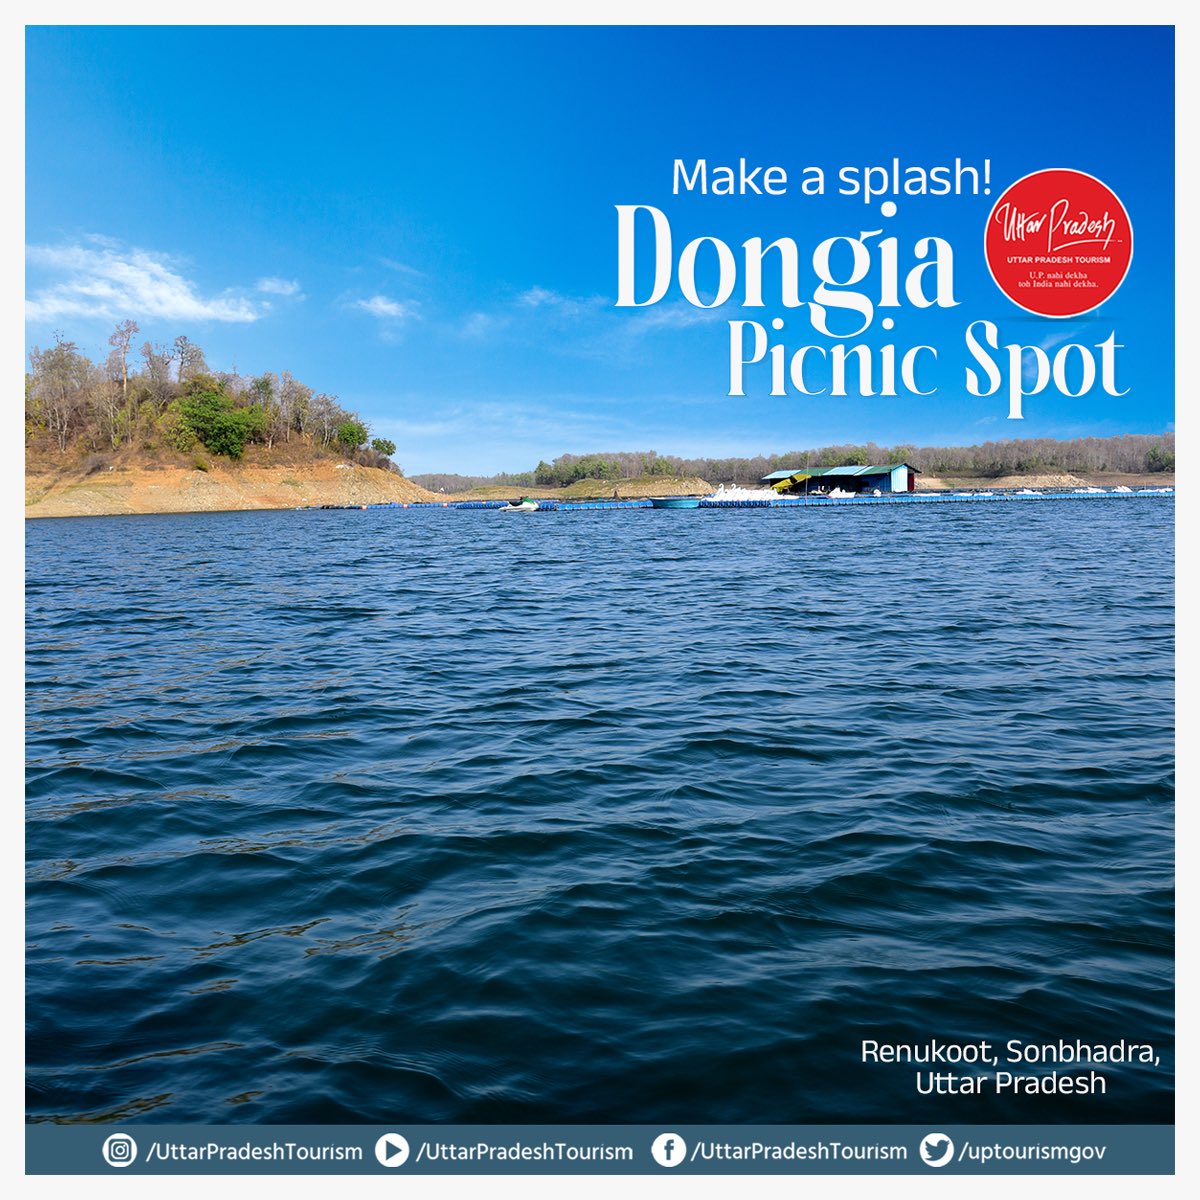 This picturesque spot offers the perfect blend of #adventure & #tranquility, ideal for a memorable day out. Enjoy boating & the stunning natural beauty at #DongiaPicnicSpot. #UPTourism #WaterLand #Renukoot #Sonbhadra #AmazingPlaces #Tourism #UttarPradesh #UPTourism @MukeshMeshram